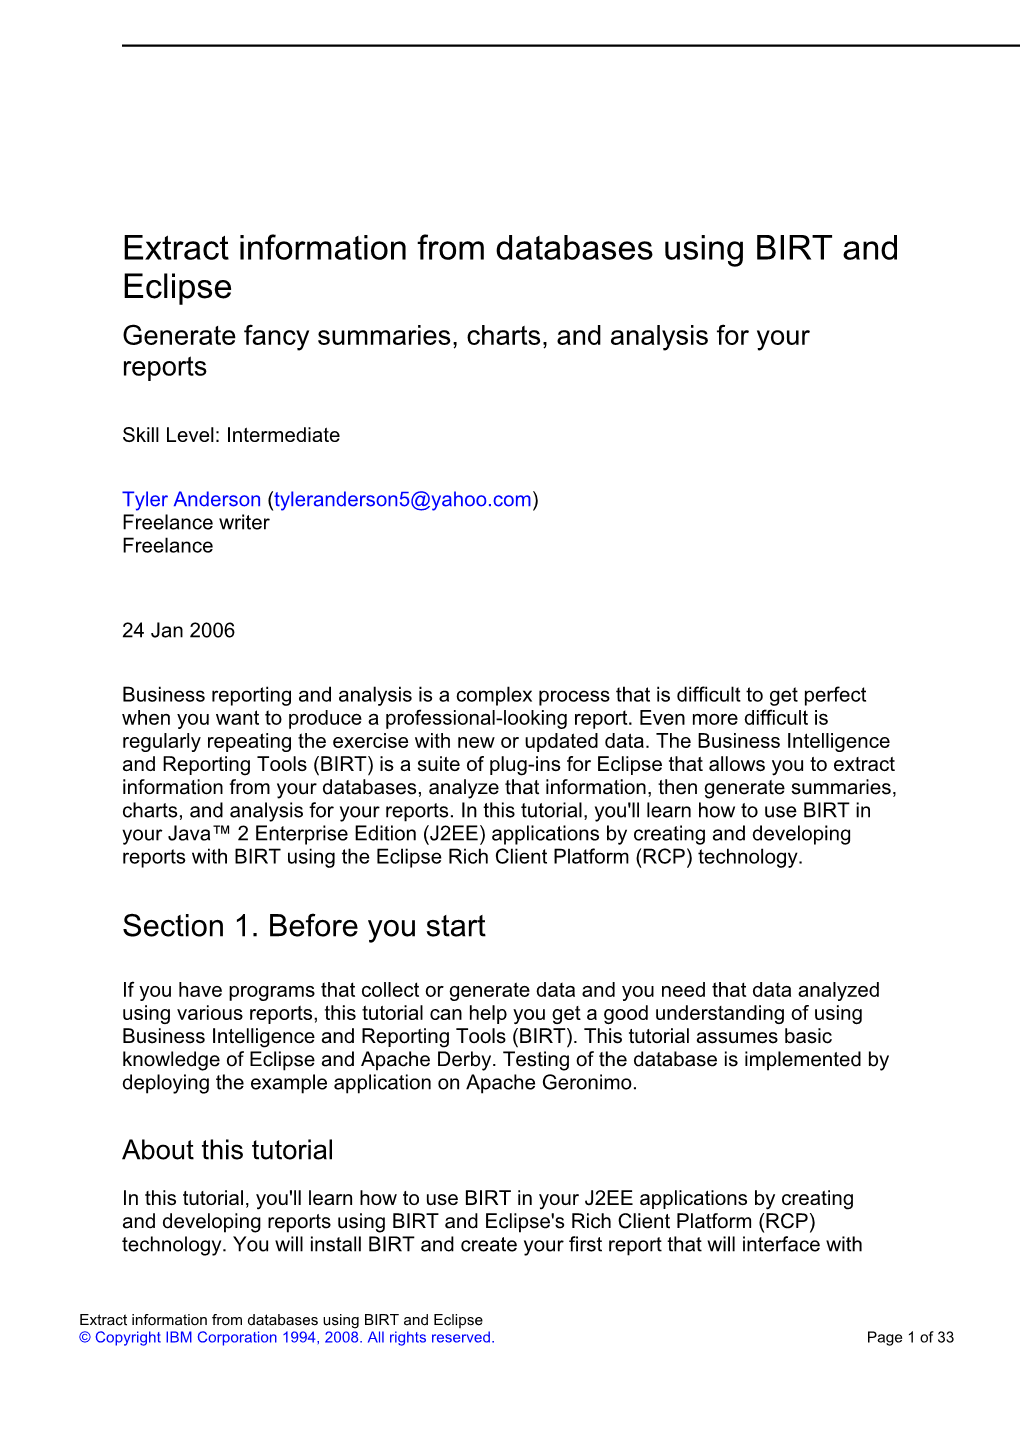 Extract Information from Databases Using BIRT and Eclipse Generate Fancy Summaries, Charts, and Analysis for Your Reports